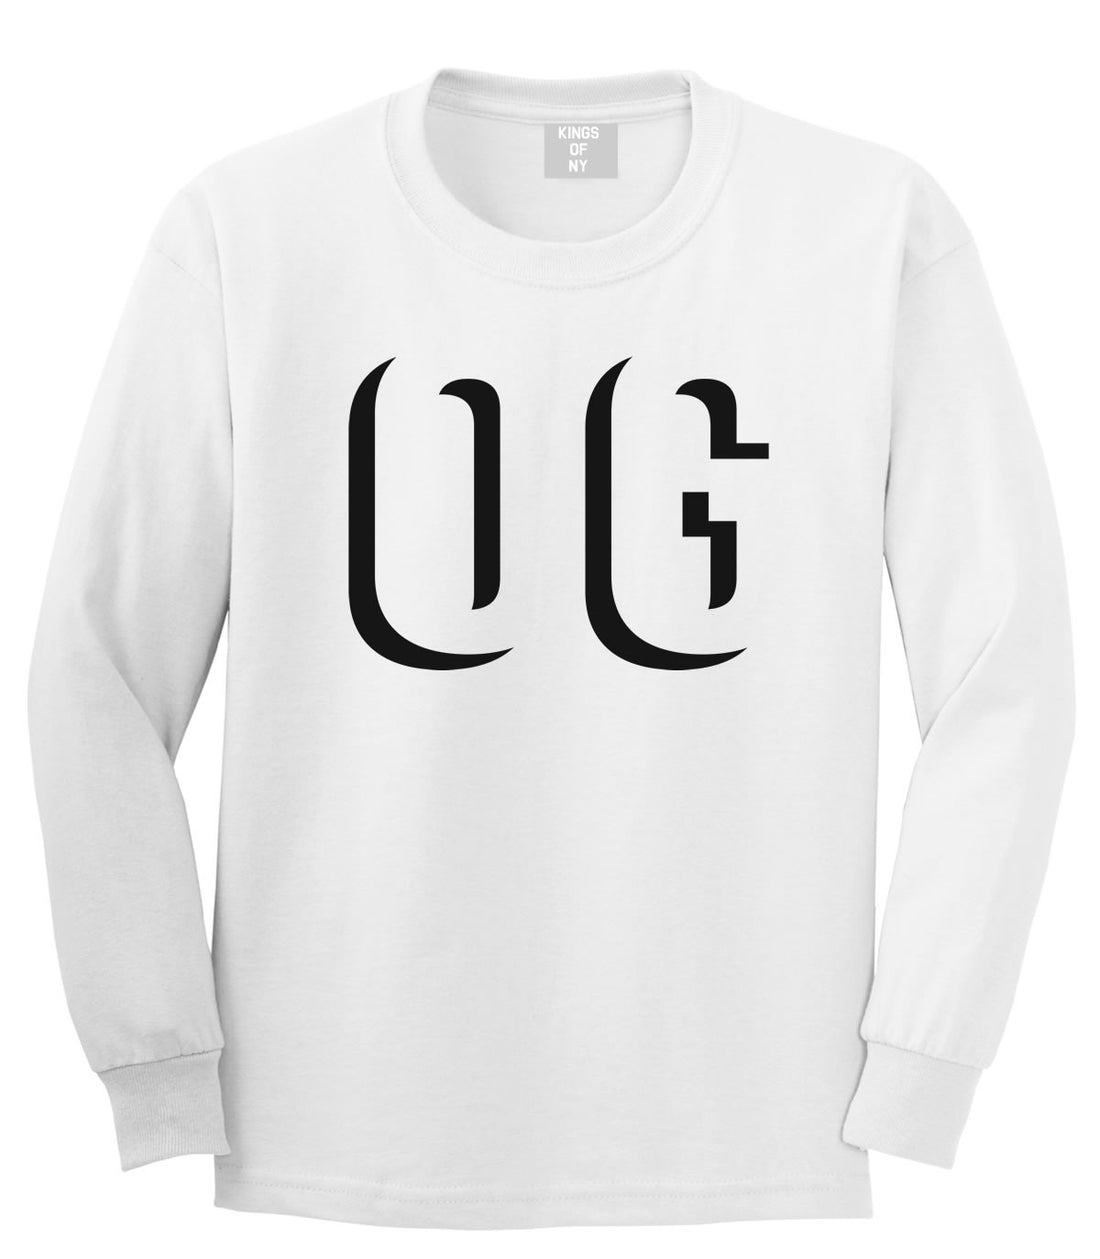 OG Shadow Originial Gangster Long Sleeve T-Shirt in White by Kings Of NY